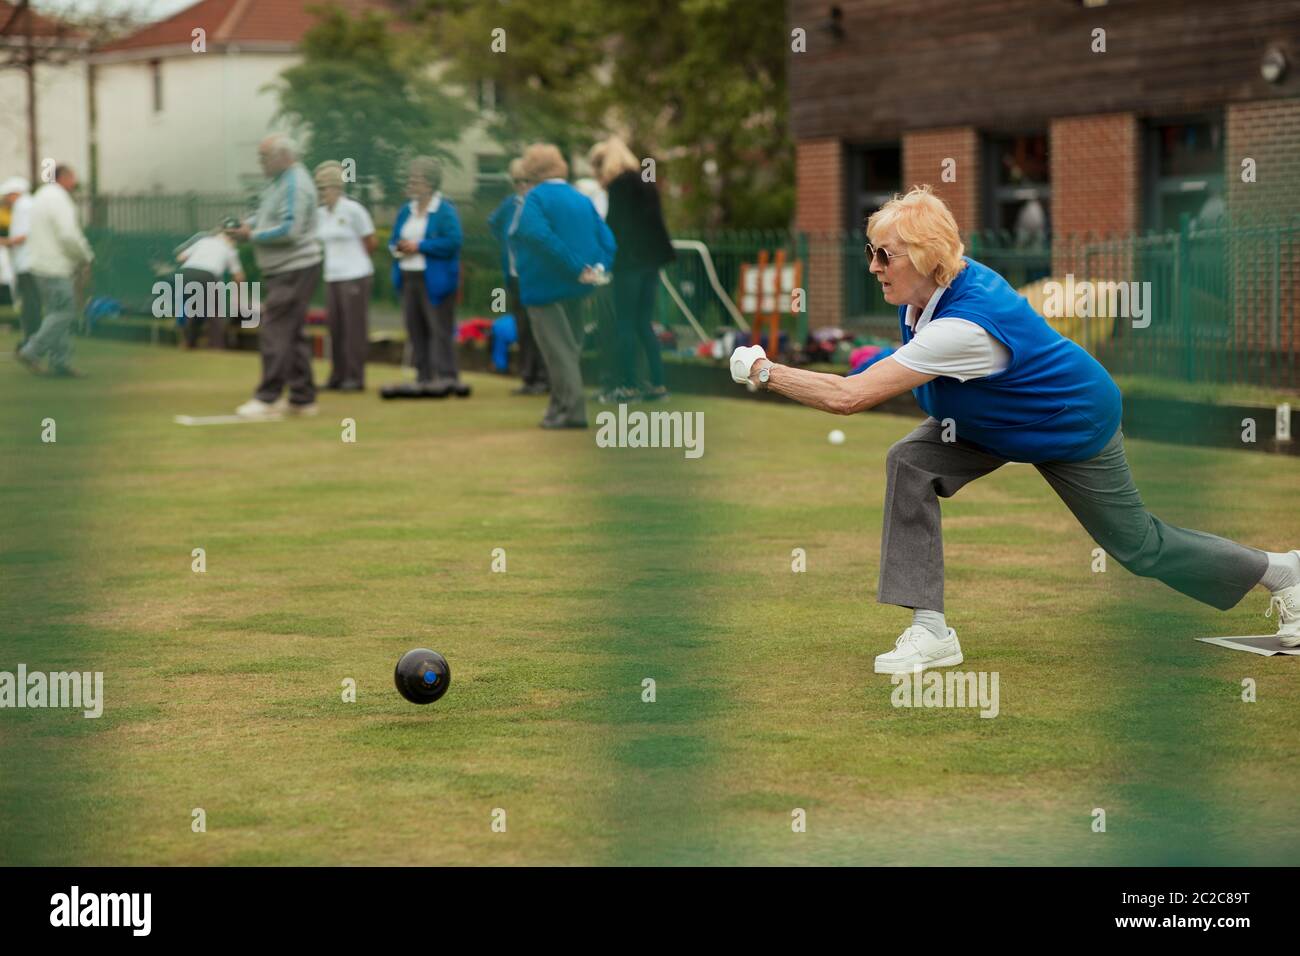 A side view shot of a senior woman taking her shot in a game of lawn bowling. Stock Photo